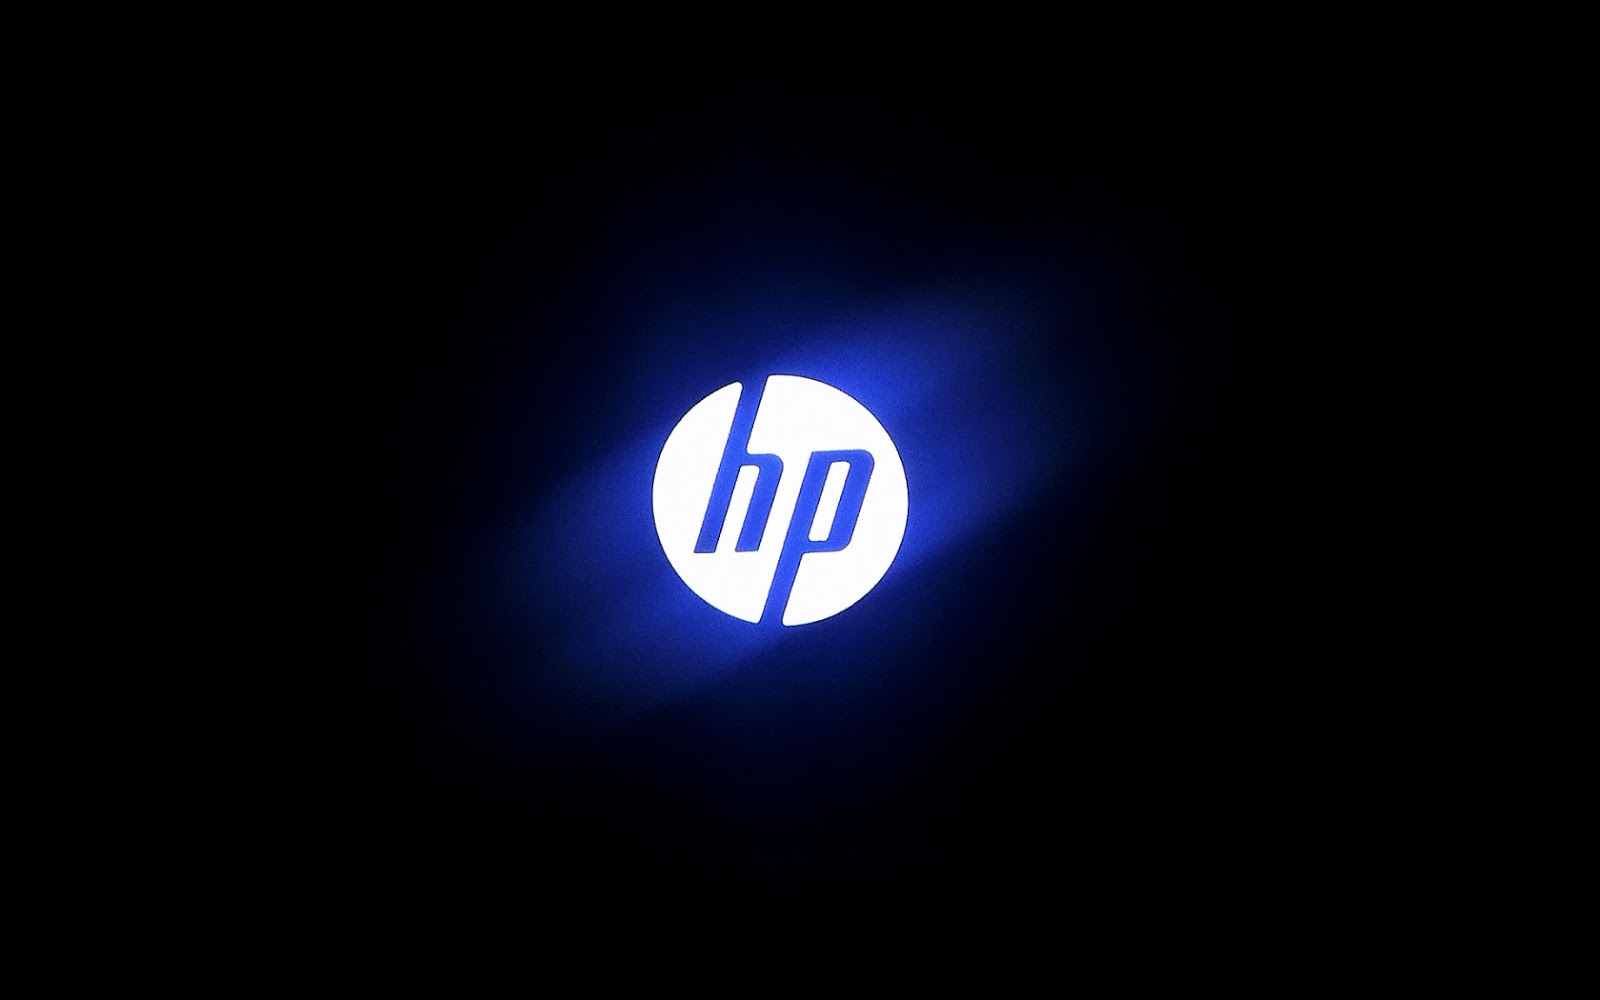  hp wallpaper for free and you can also share these wallpapers with